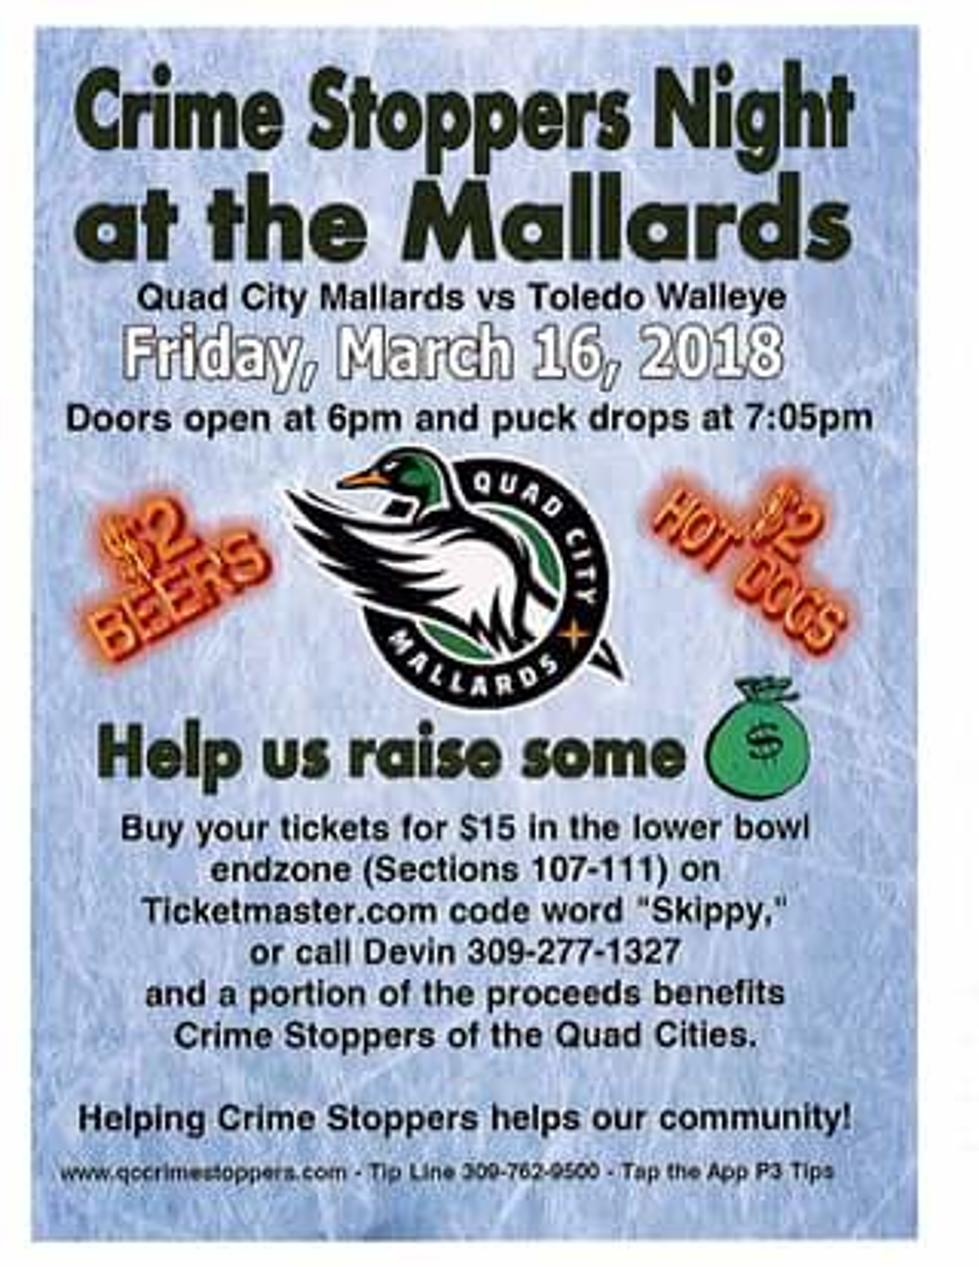 Helping Crime Stoppers Helps Our Community!